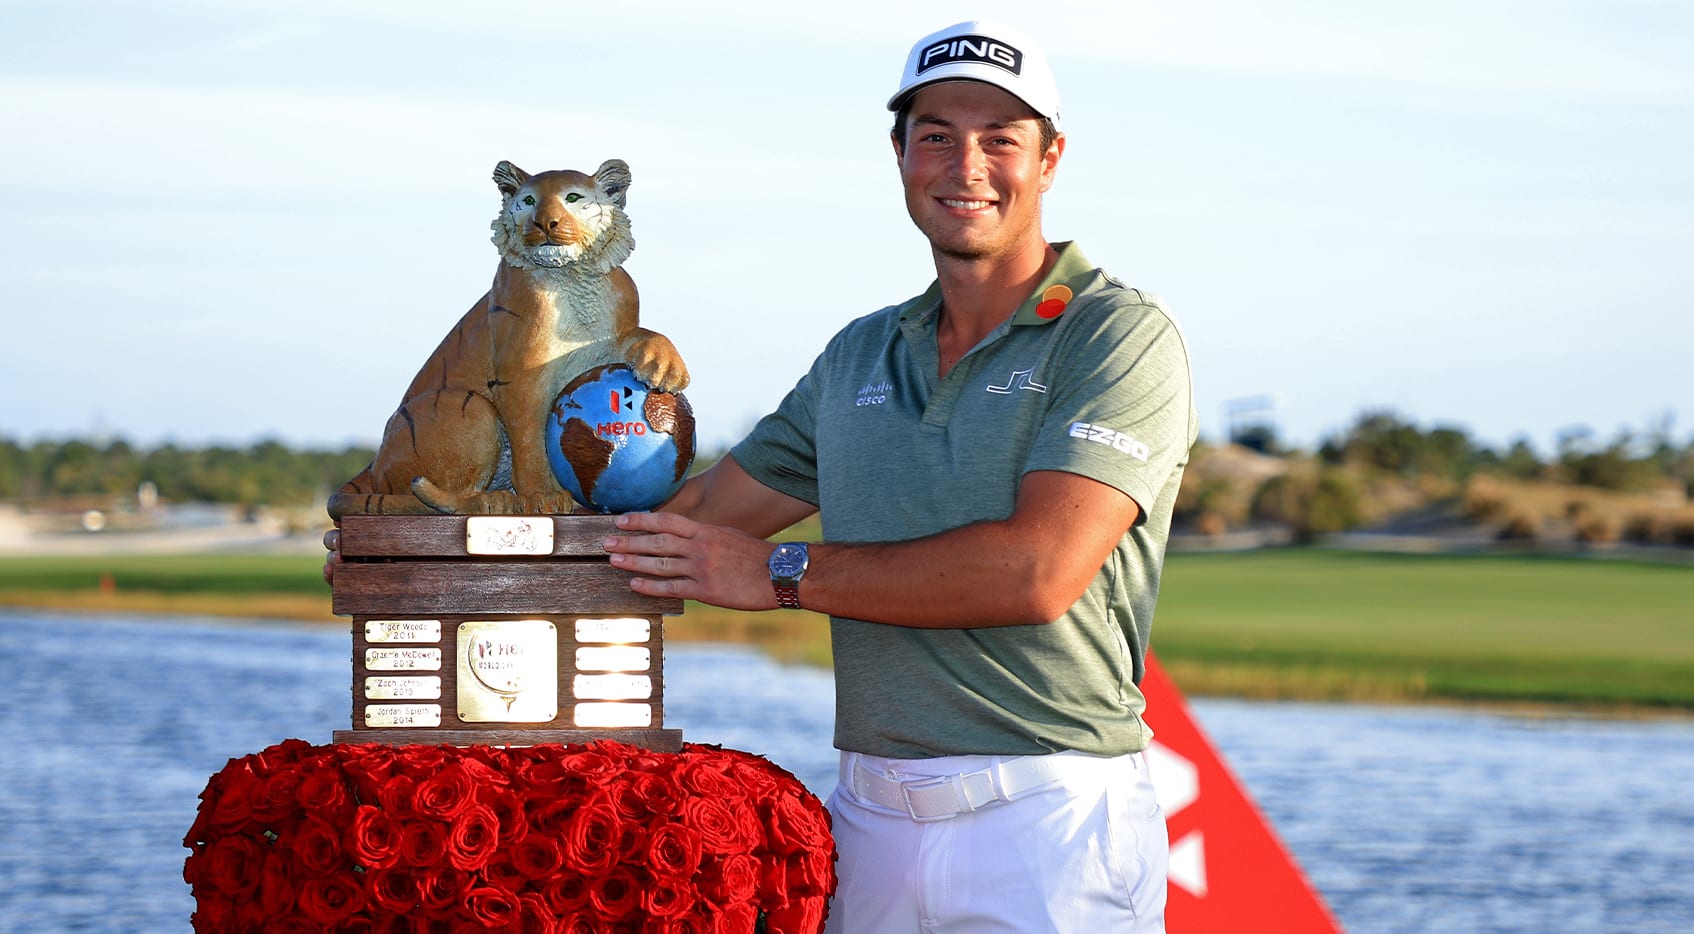 The First Look The Hero World Challenge PGA TOUR